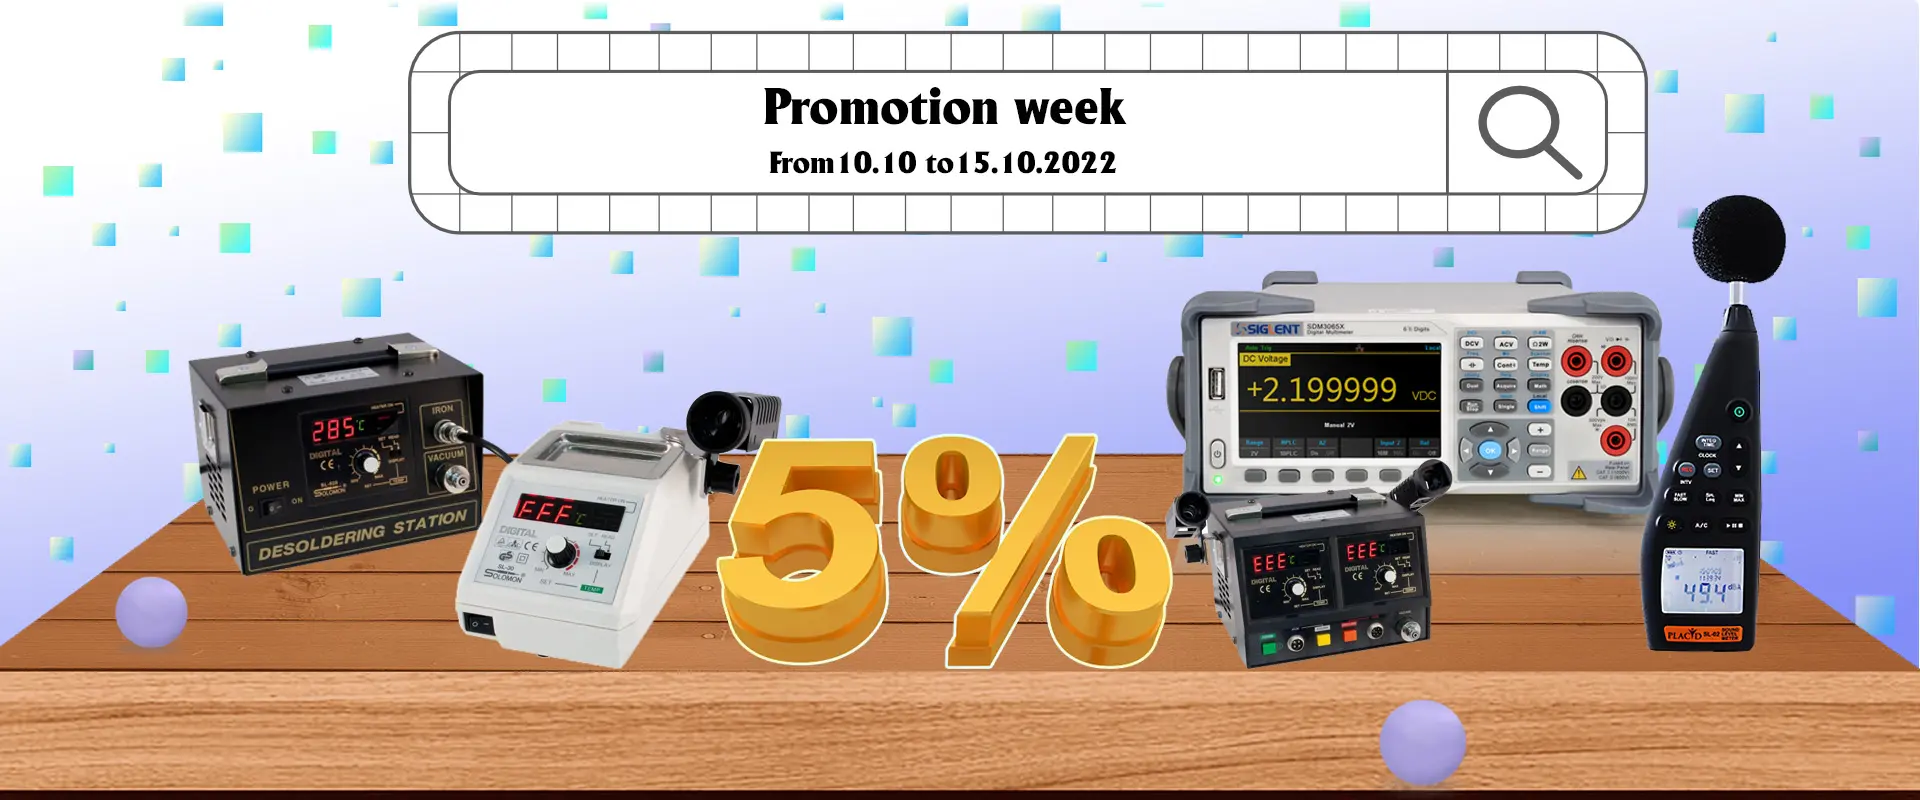 Promotion week from 10/10 - 15/10/2022!